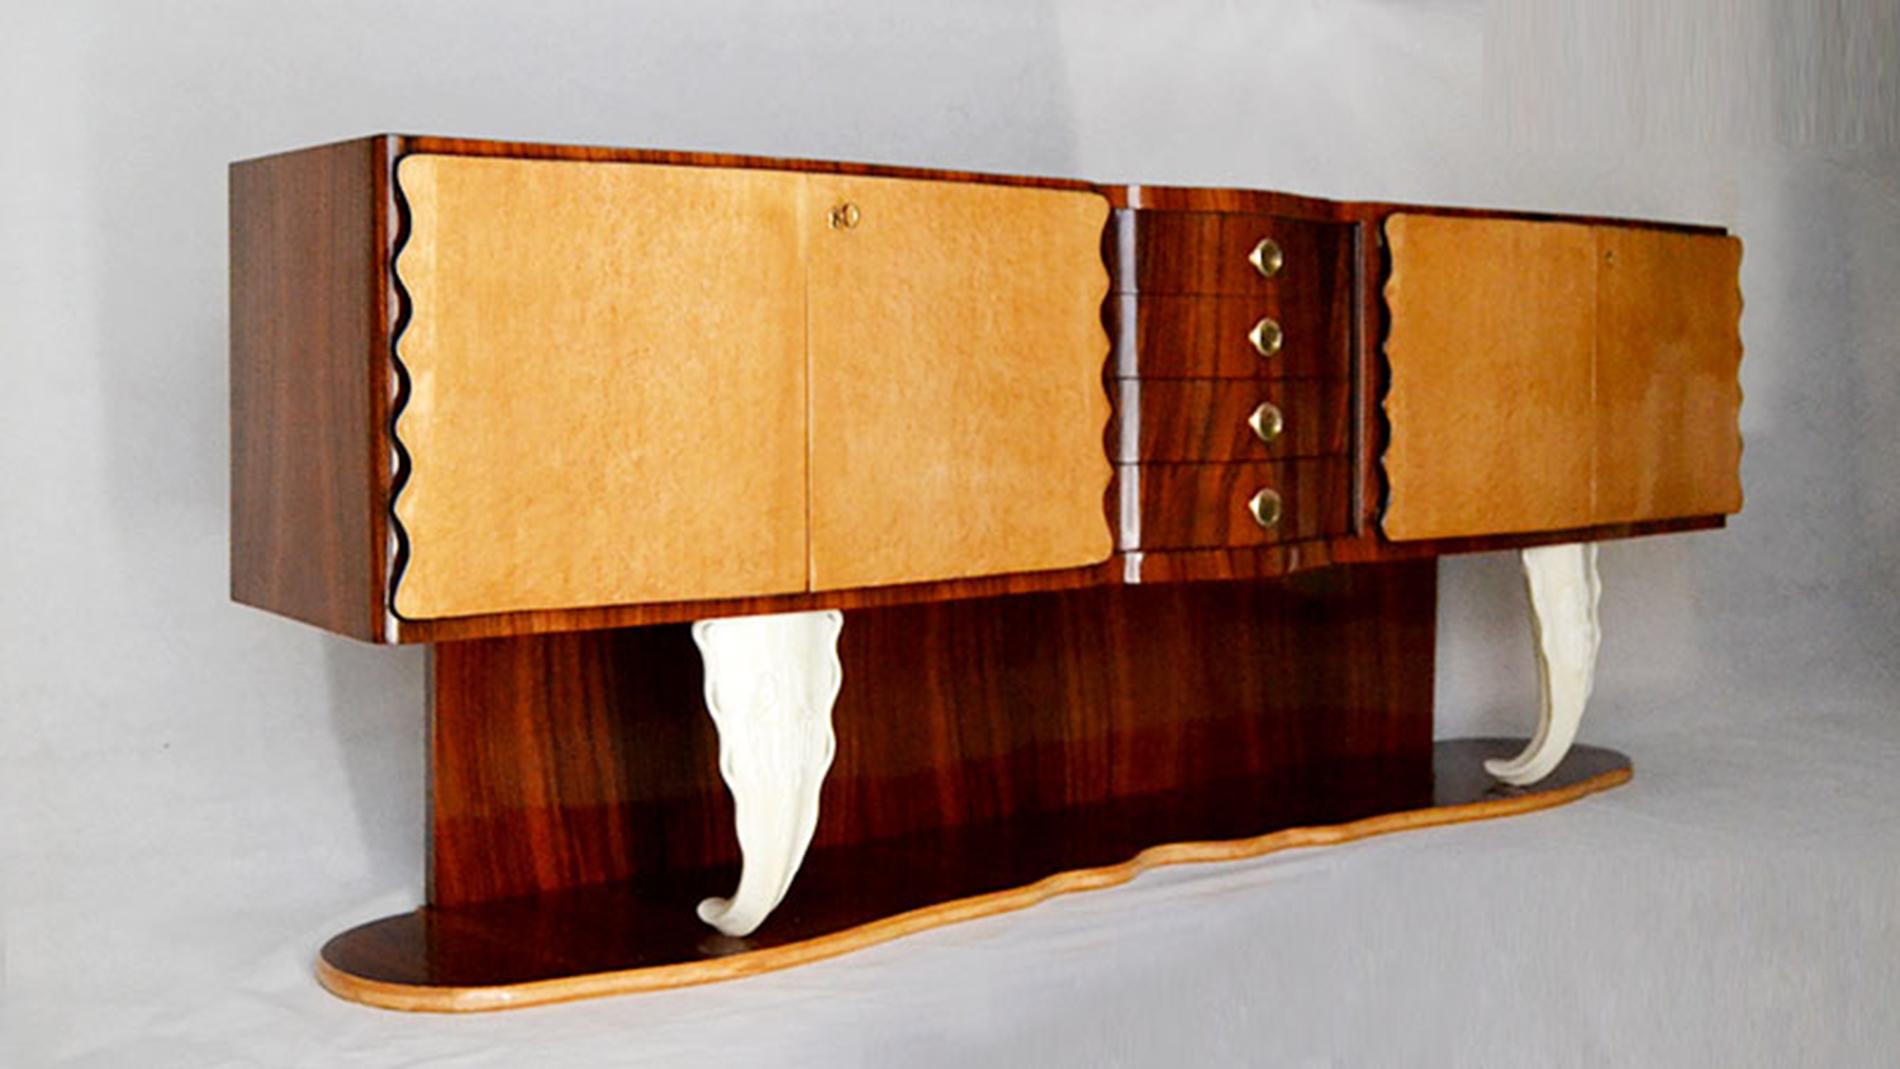 Large Art Deco buffet by designer Pier Luigi Colli, rosewood, birch root and mahogany interiors.
Furniture designed by Pier Luigi Colli, Italy
circa 1940, Italy
Good vintage condition
Documentation: attached 